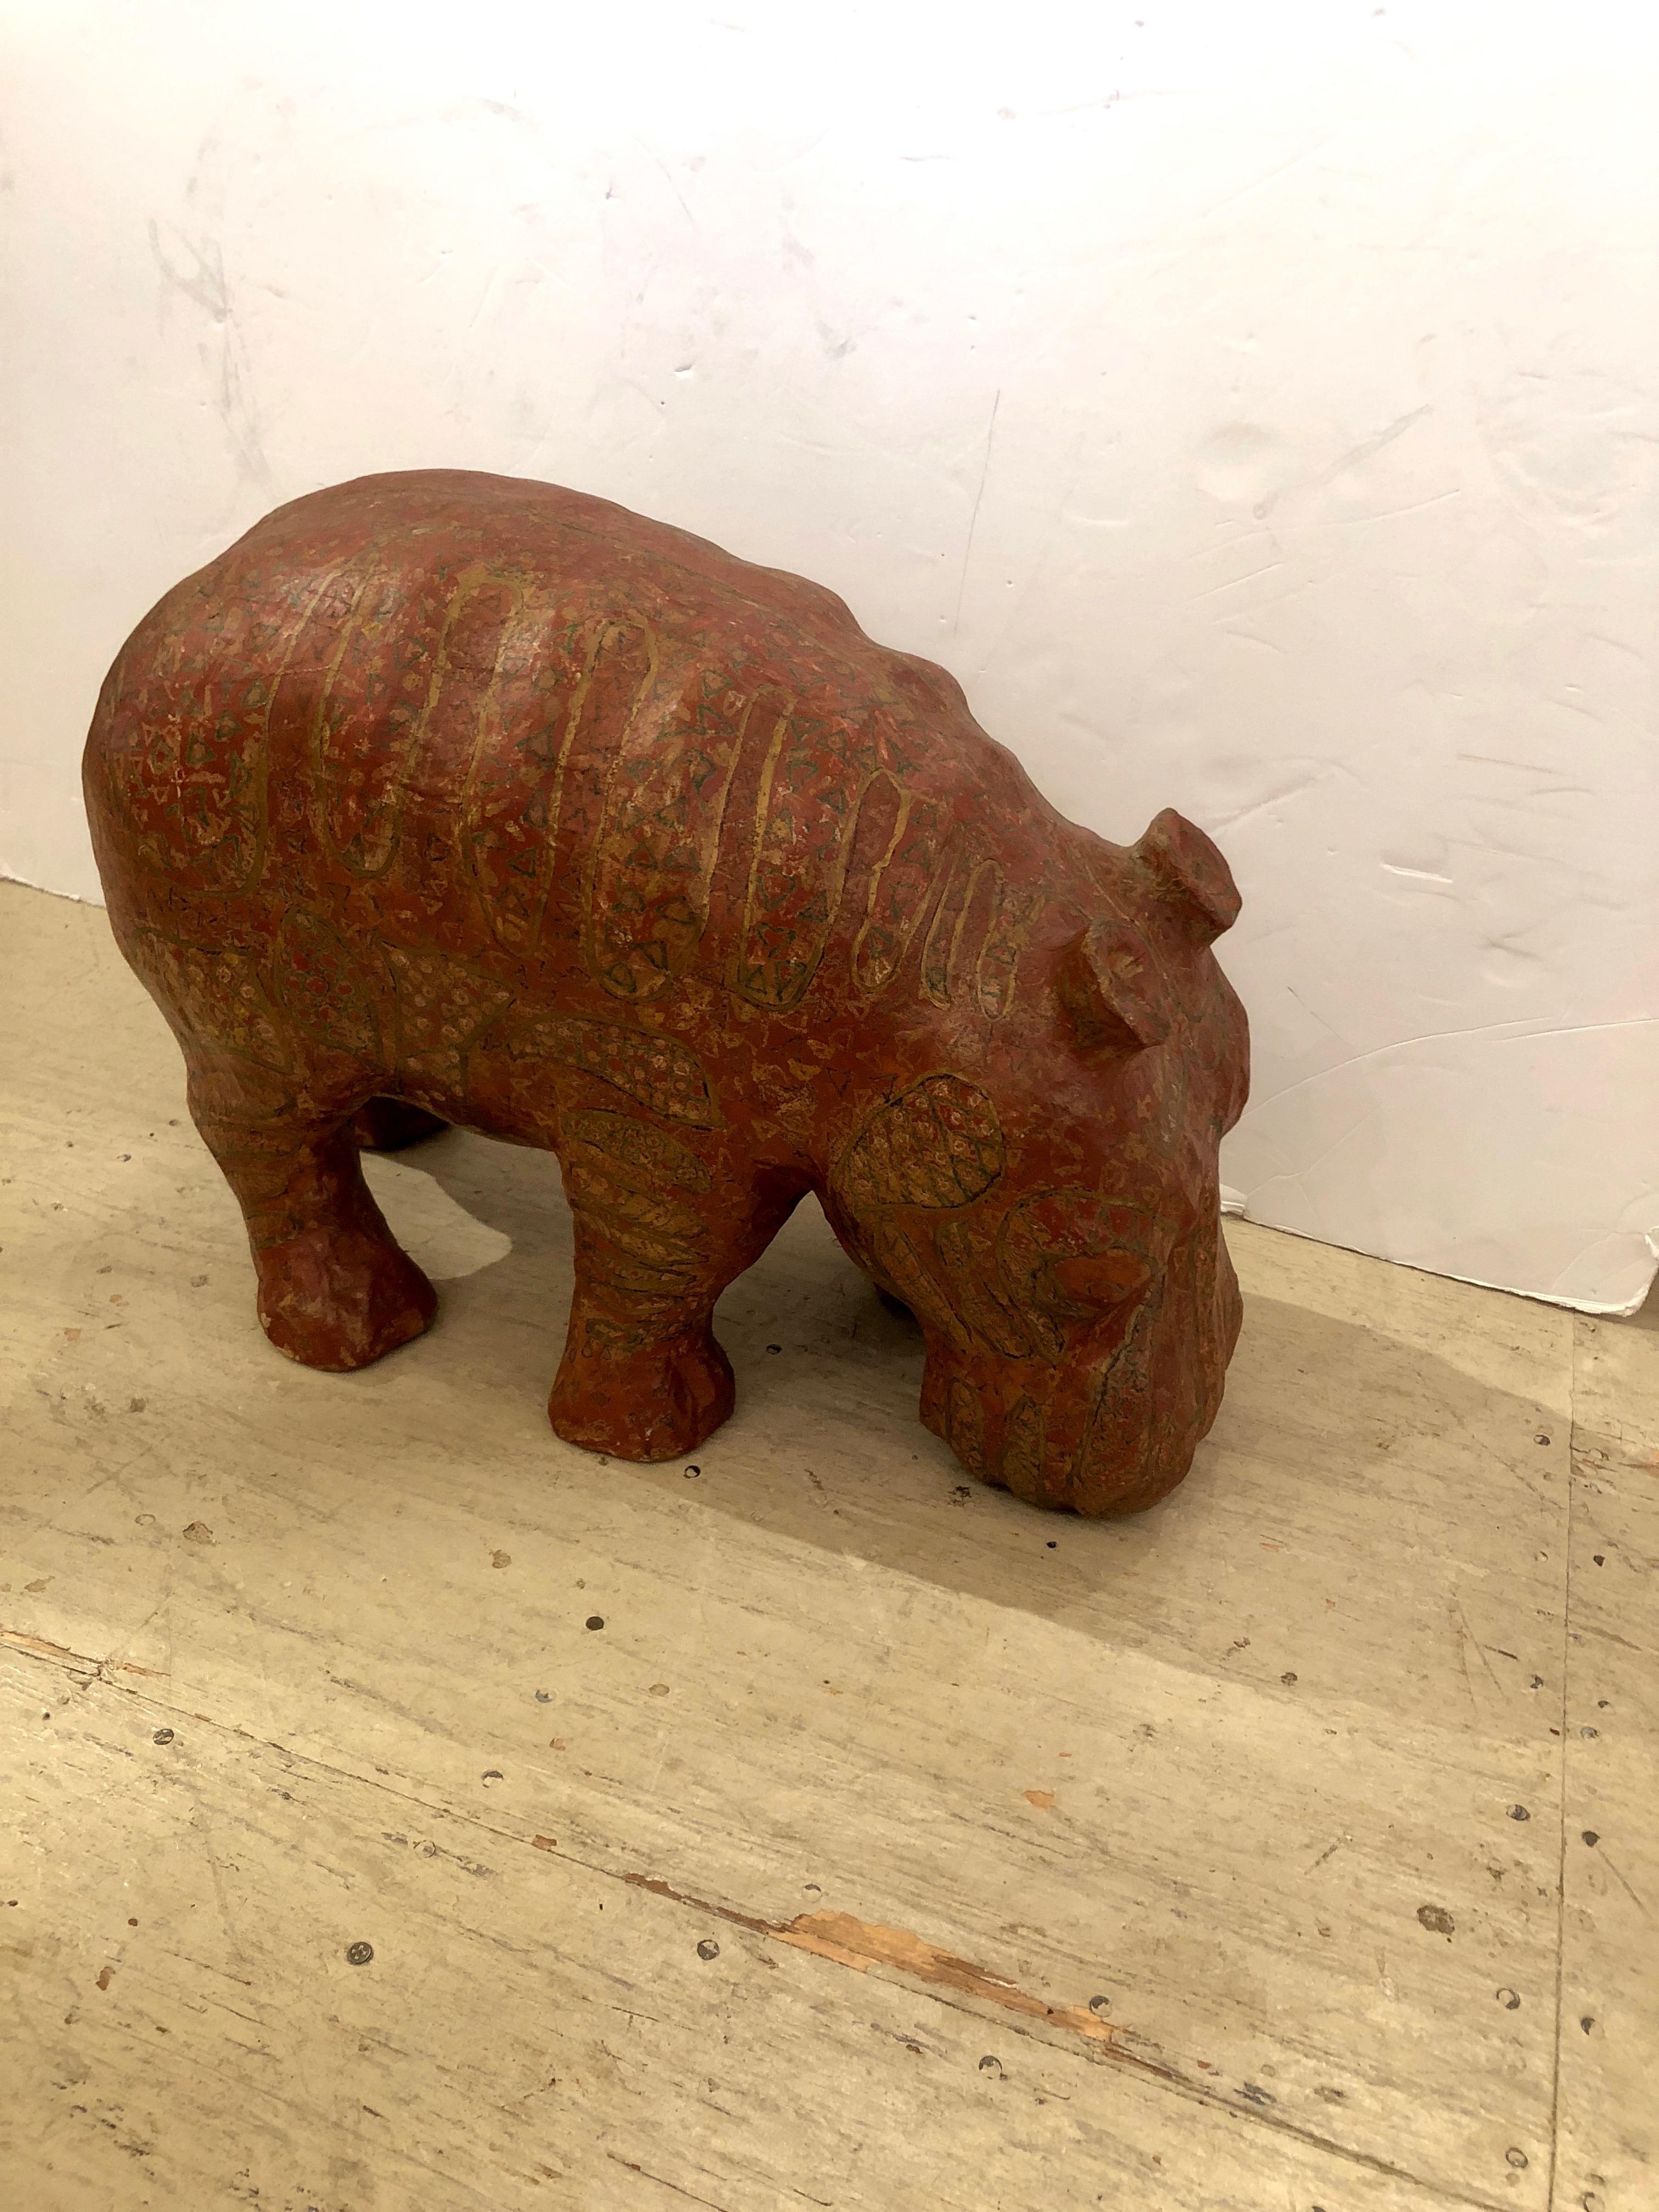 Wonderful large papier mâché sculpture of a hippo, hand painted with an elaborate pattern in a brick red color palette.